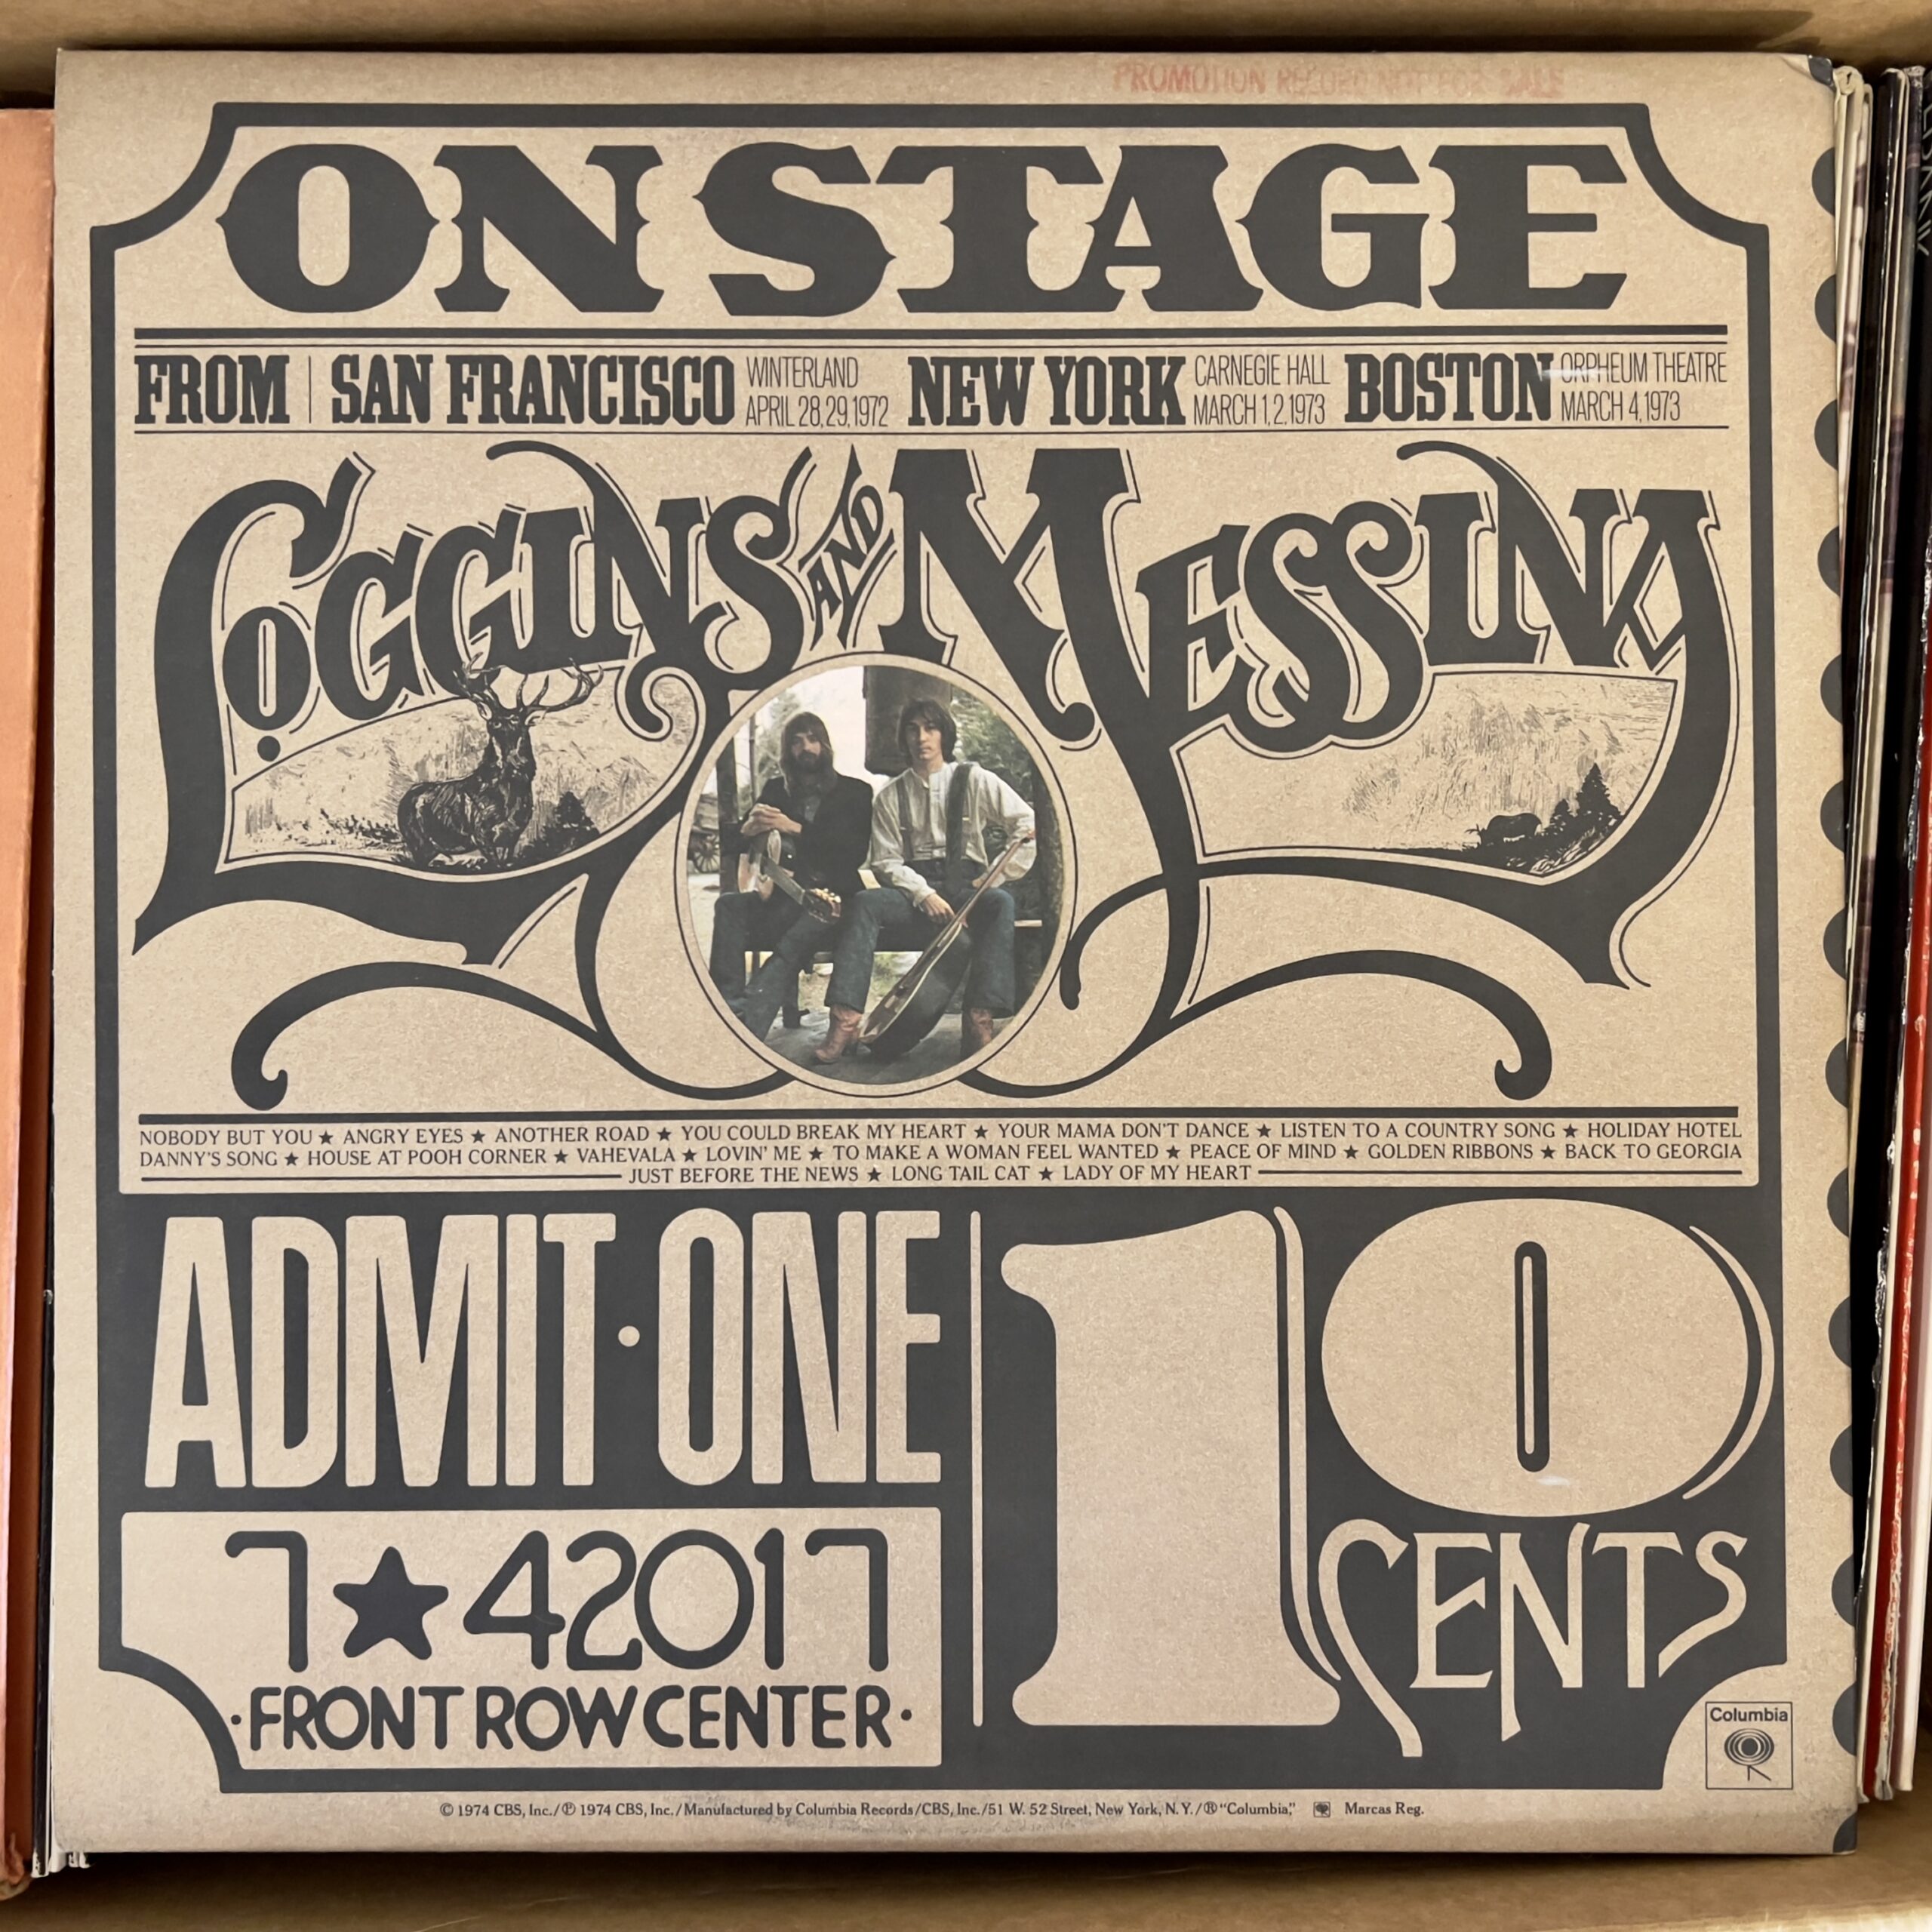 On Stage by Loggins and Messina